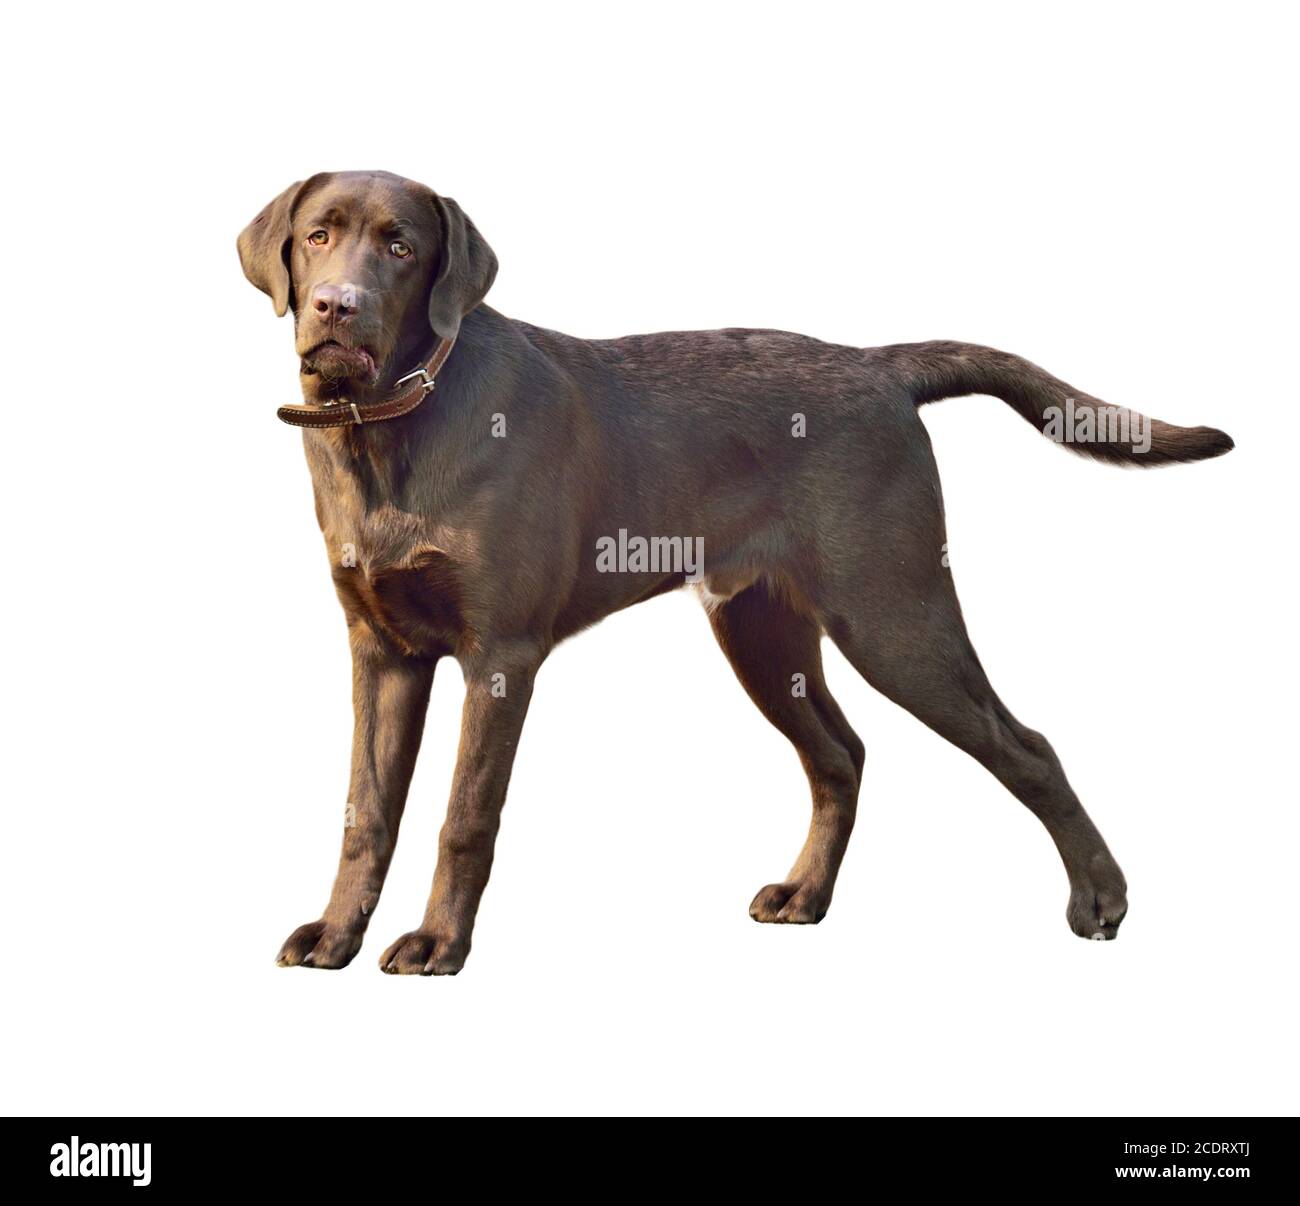 Lab dog Cut Out Stock Images & Pictures - Alamy